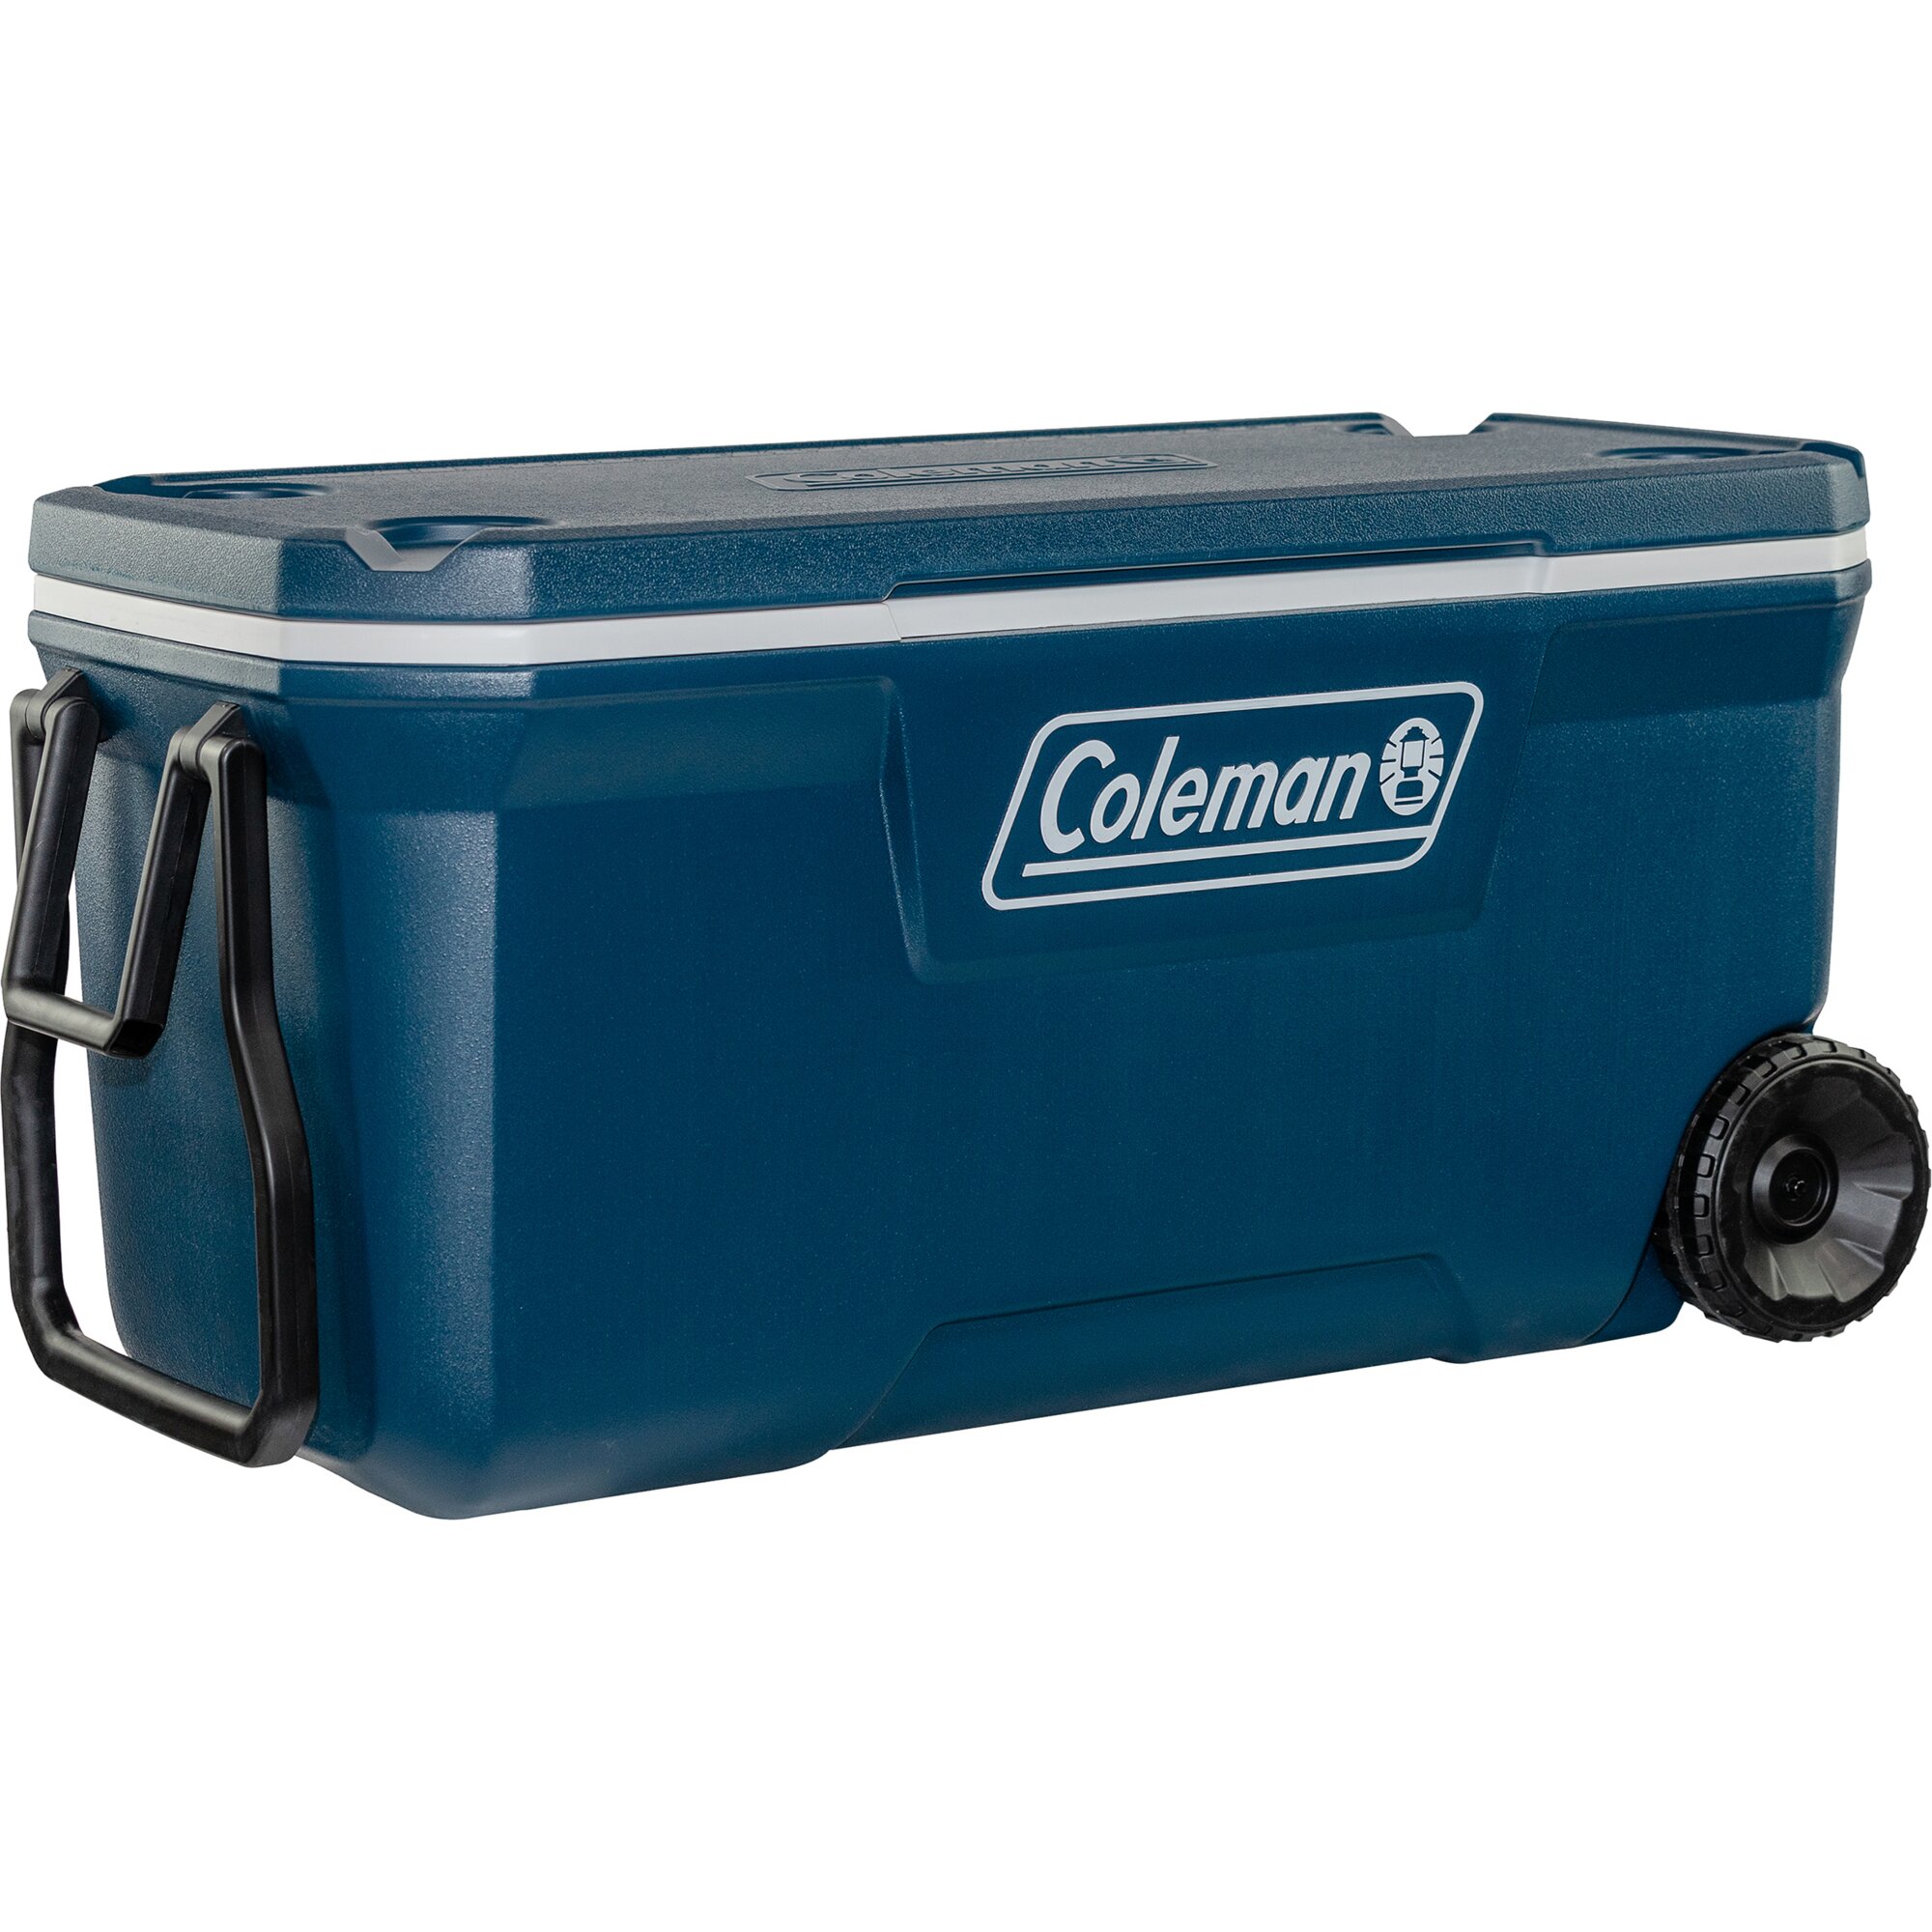 Kühlcontainer Xtreme Wheeled Cooler QT